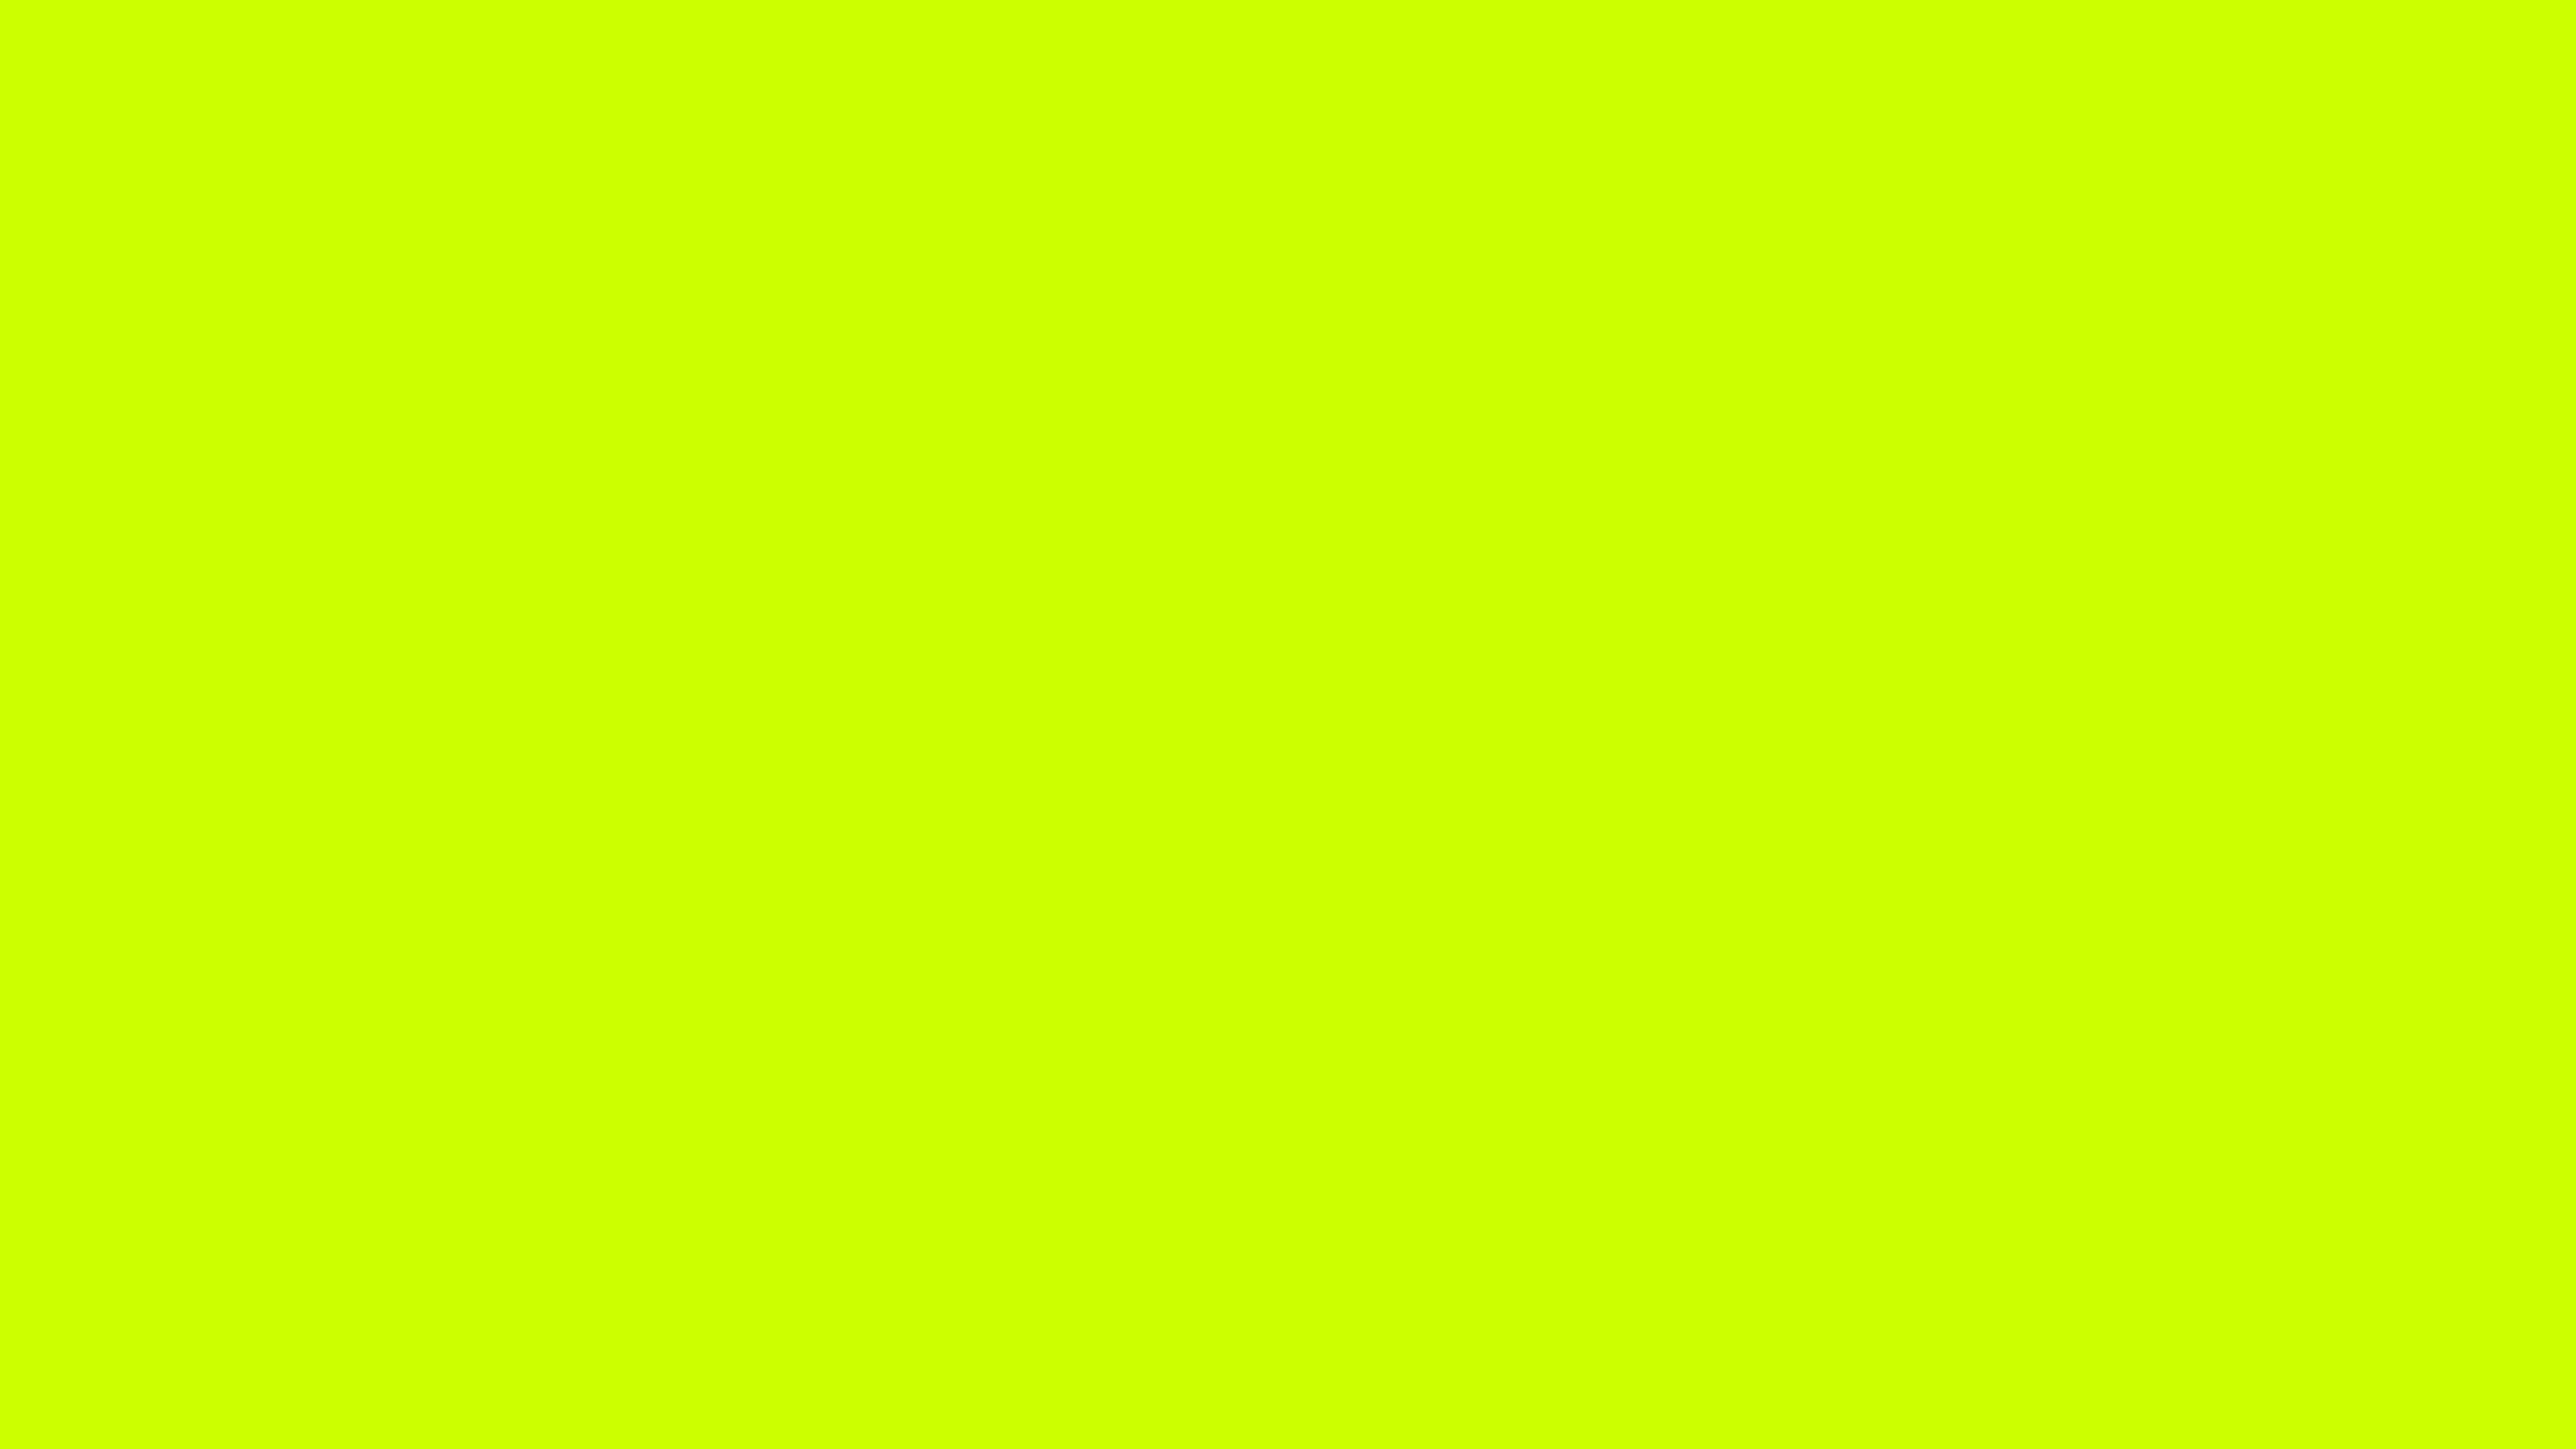 7680x4320 Fluorescent Yellow Solid Color Background